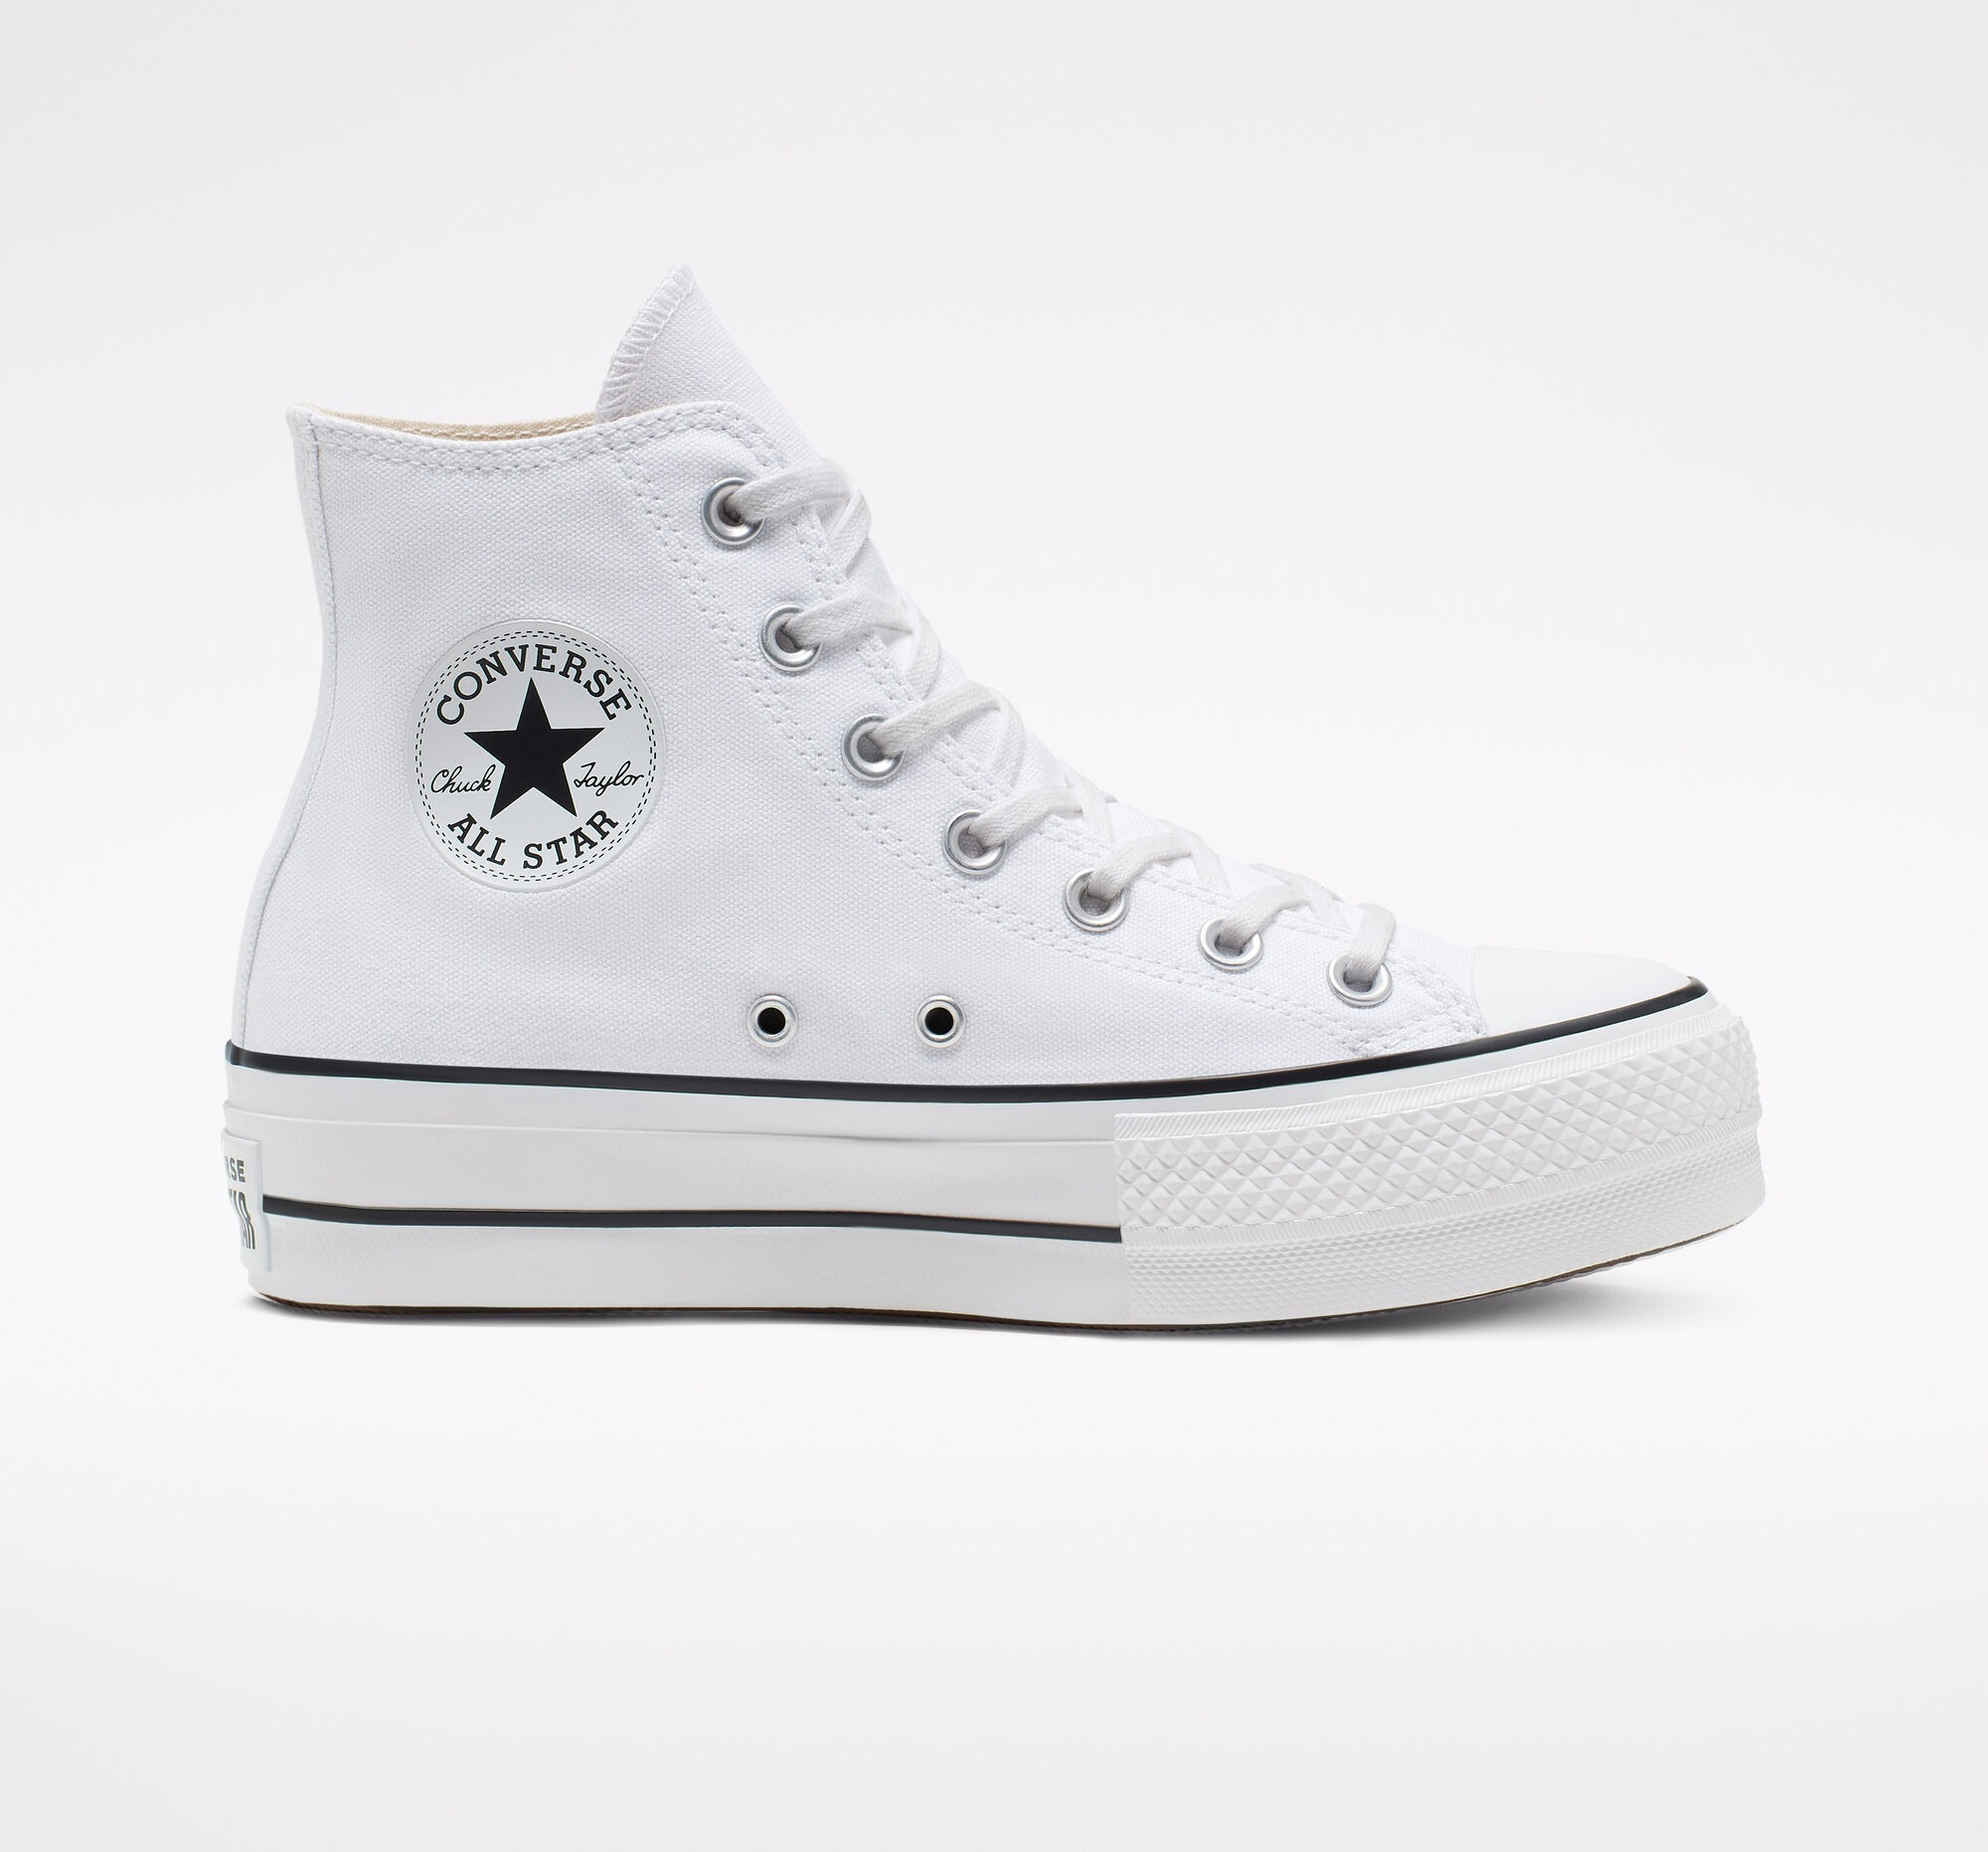 Converse Chuck Taylor All Star Plate-forme Blanche